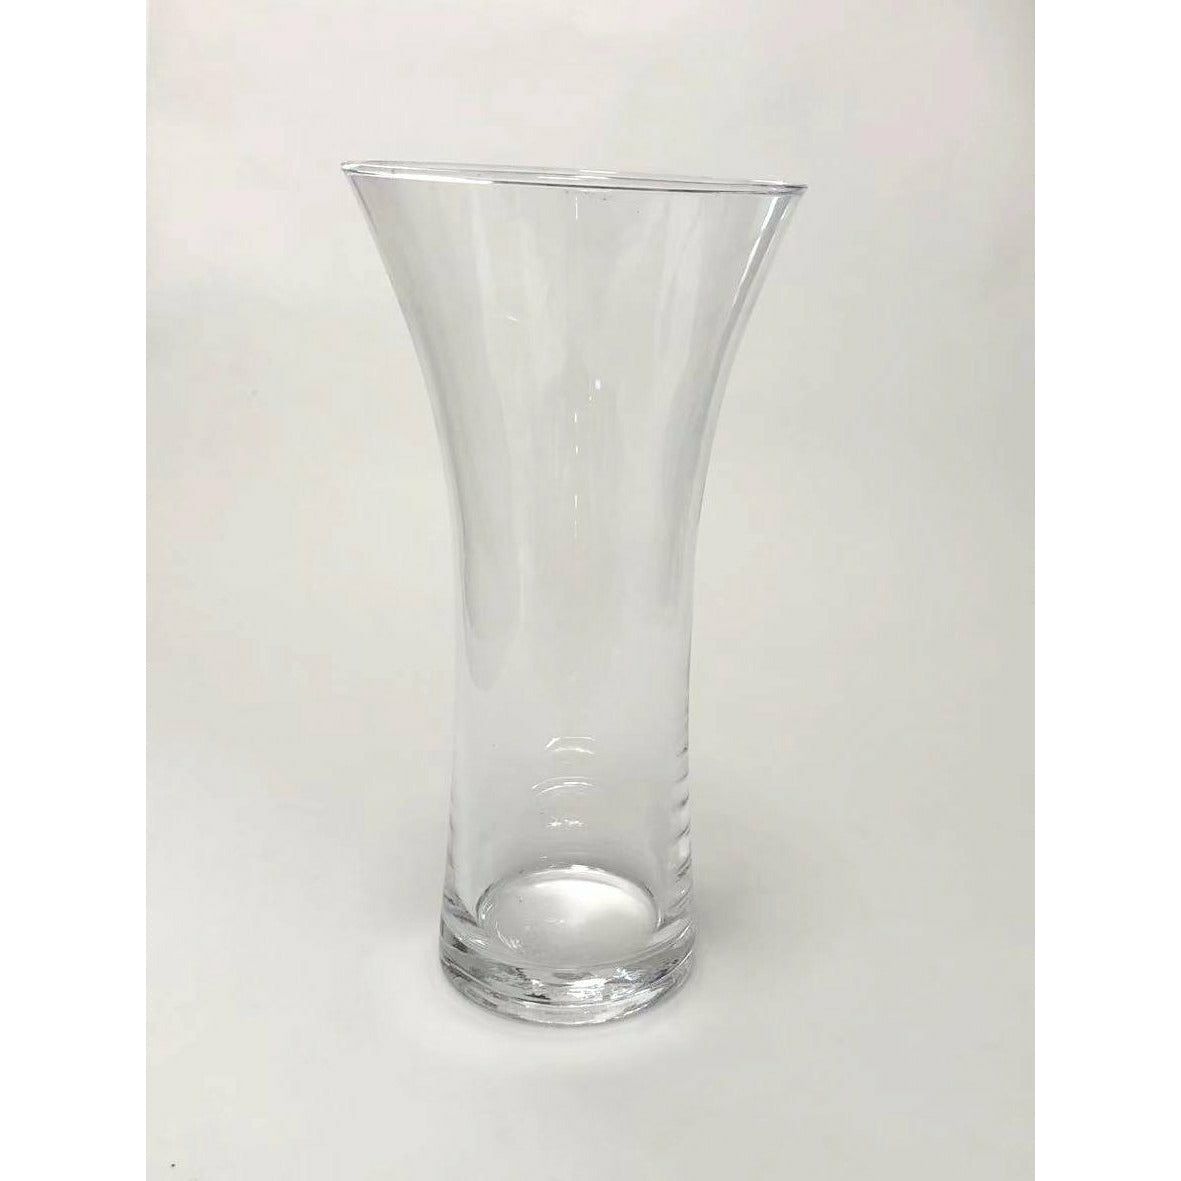 Clear Glass Vase - See Dimensions Below - Dollars and Sense